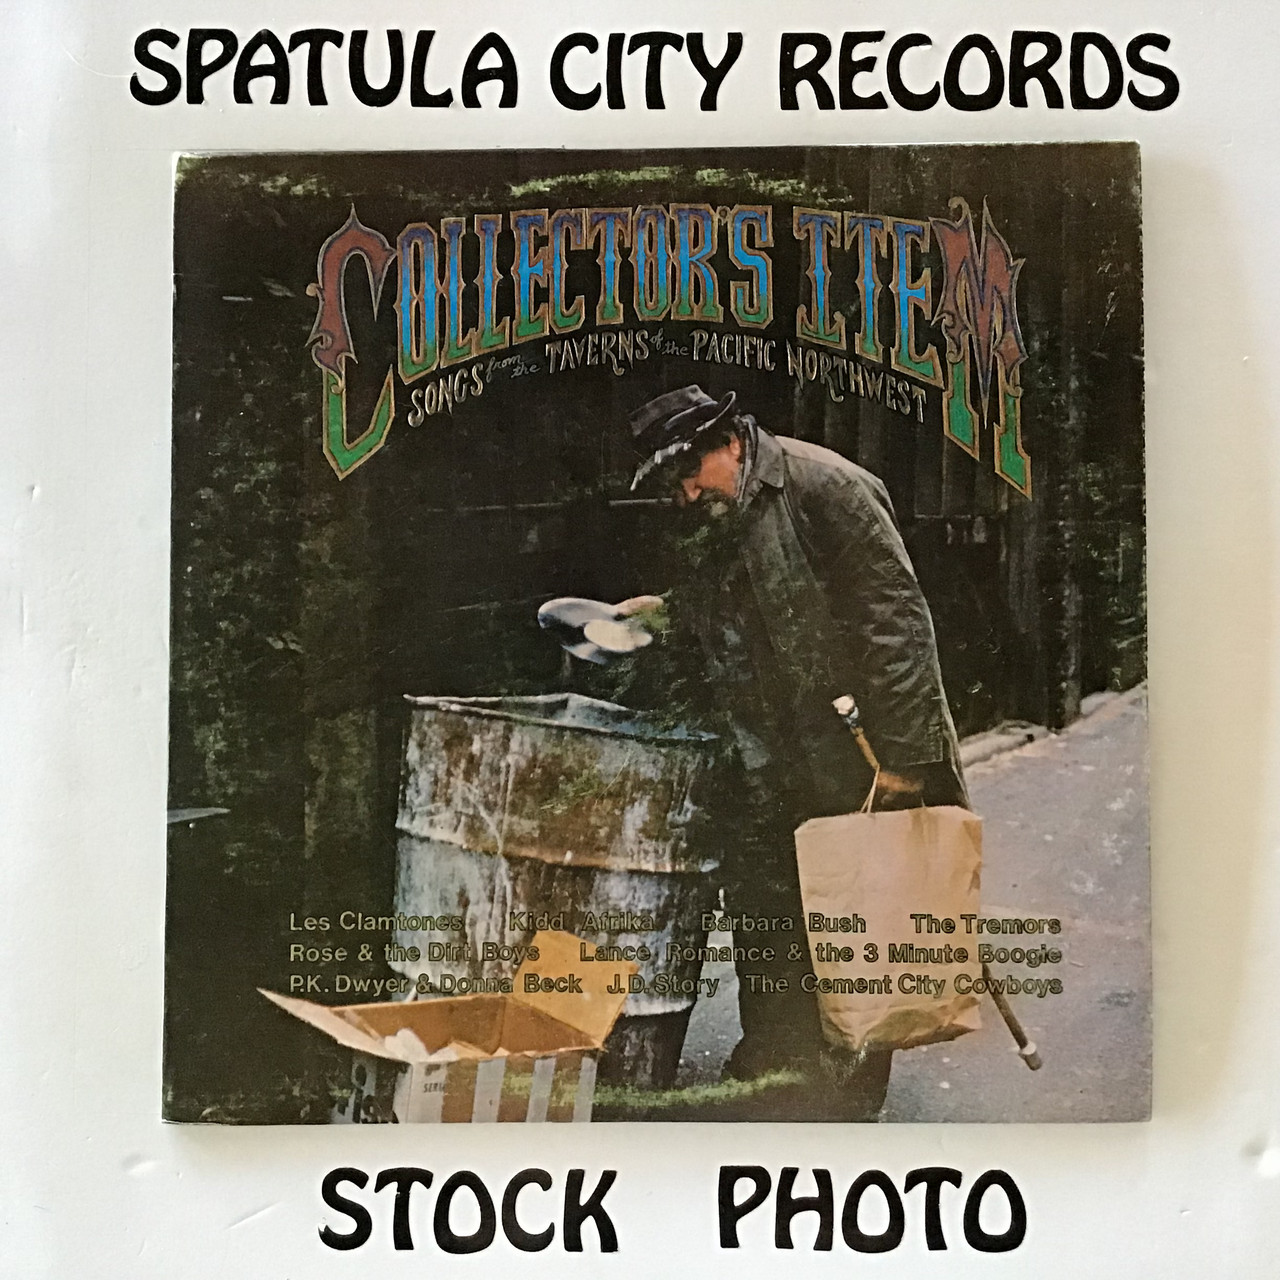 Collector's Item: Songs From The Taverns Of The Pacific Northwest - compilation - IMPORT - vinyl record LP